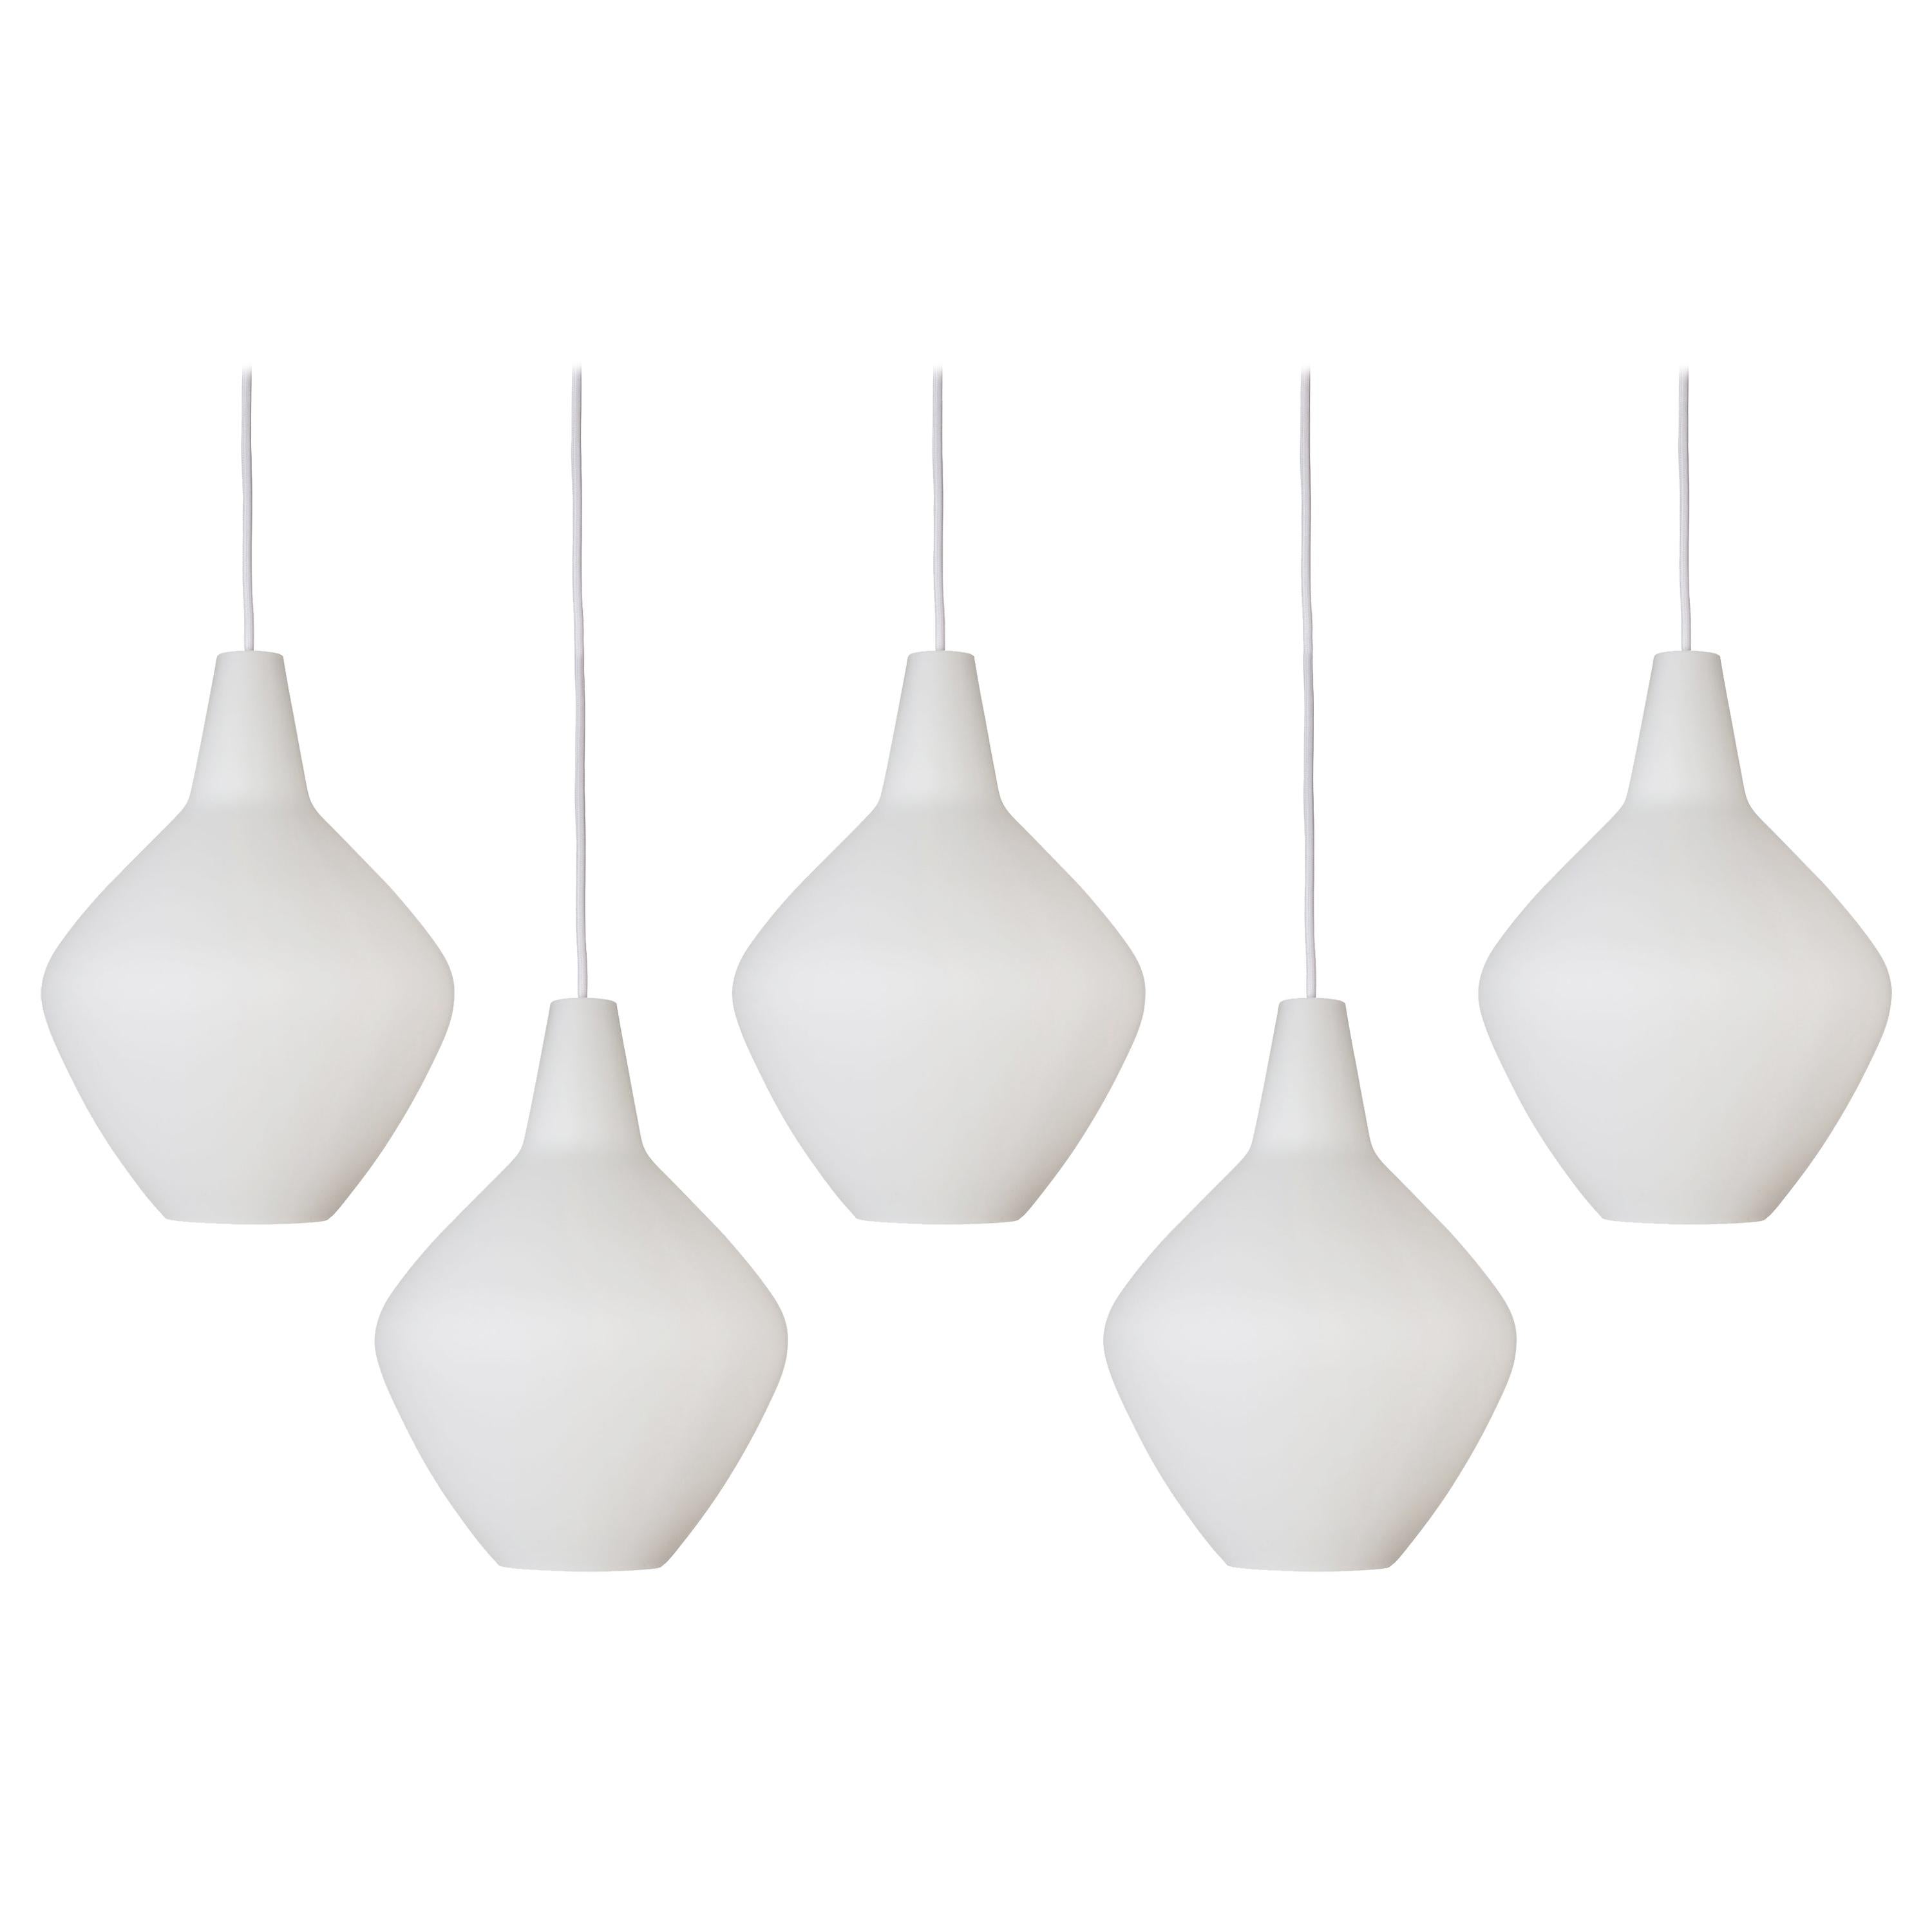 Lisa Johansson-Pape glass 'Onion' pendants. Hand blown in thick opaline glass with thick white cloth cord. Authorized re-edition by Innolux Oy, Finland.

Price is per item. One in stock. Out of stock lead time 3-4 weeks or more. Please note that